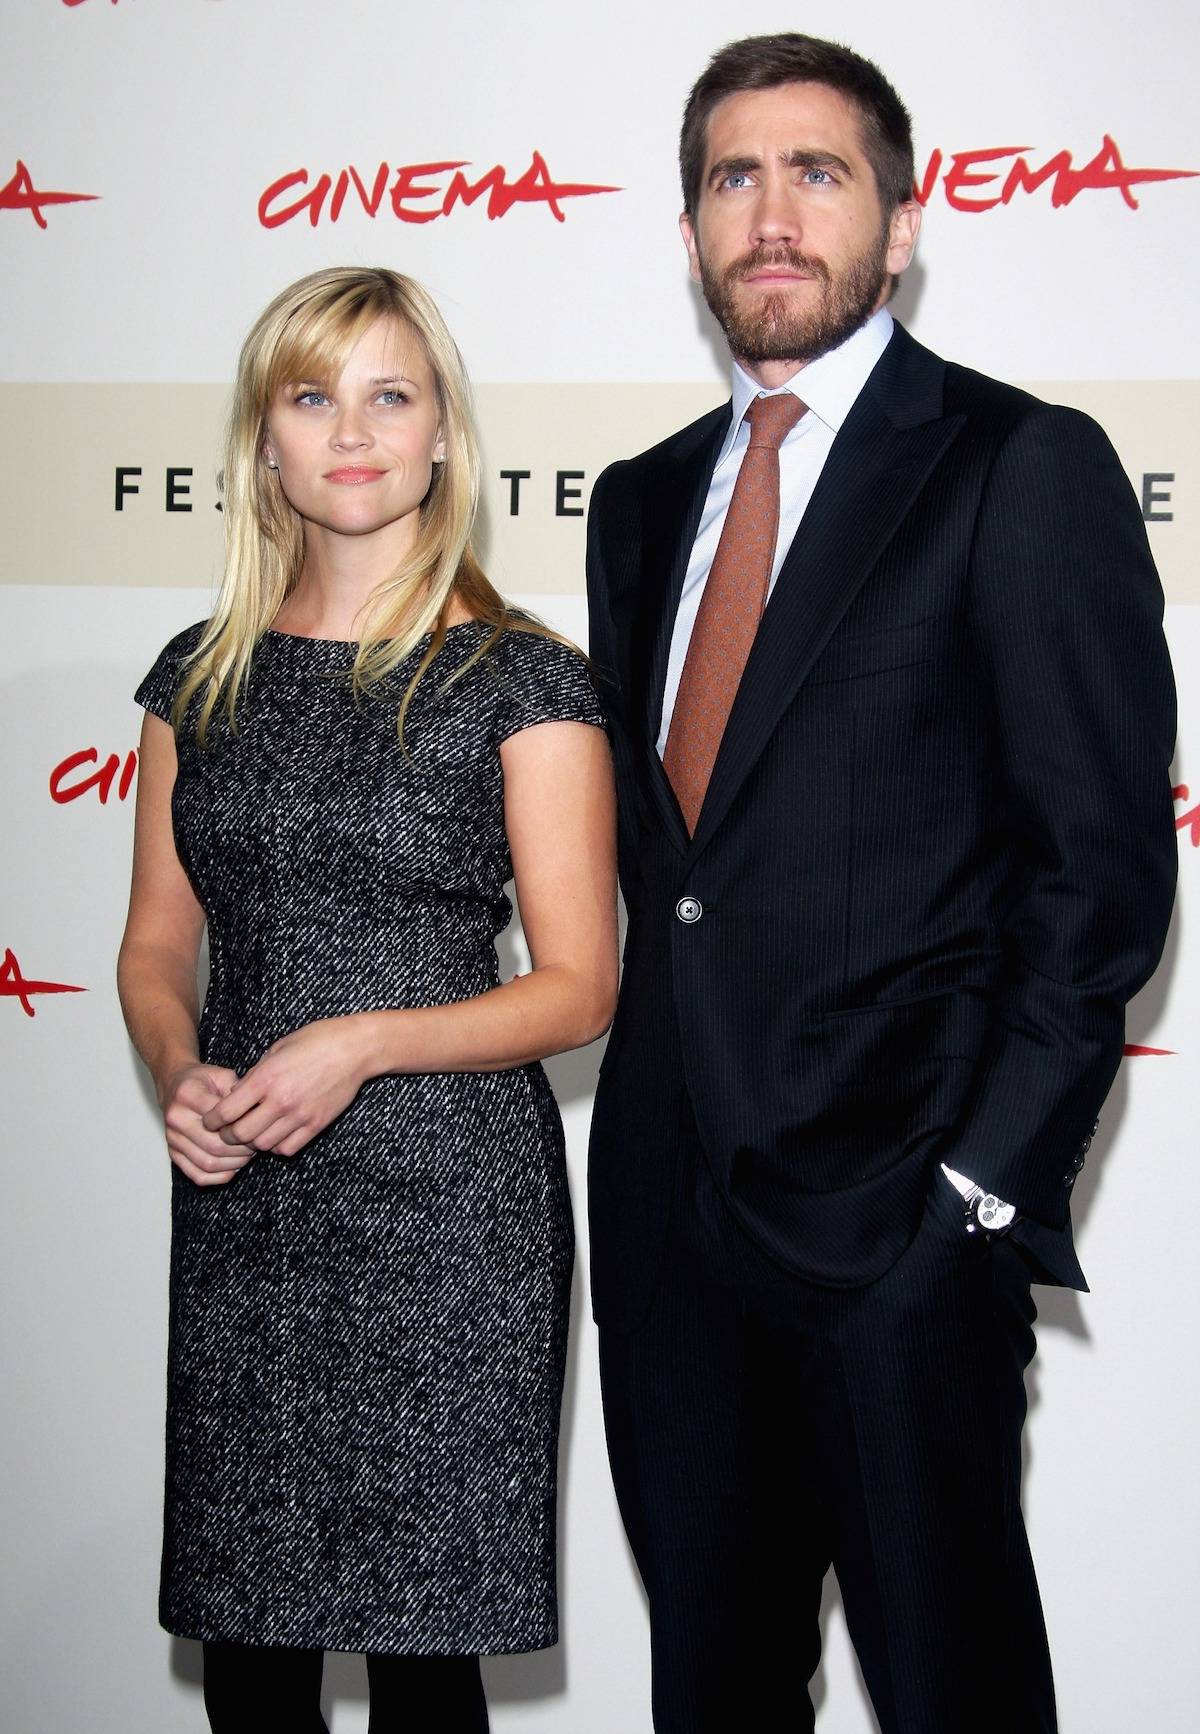 Reese Witherspoon i Jake Gyllenhaal (Fot. Getty Images)